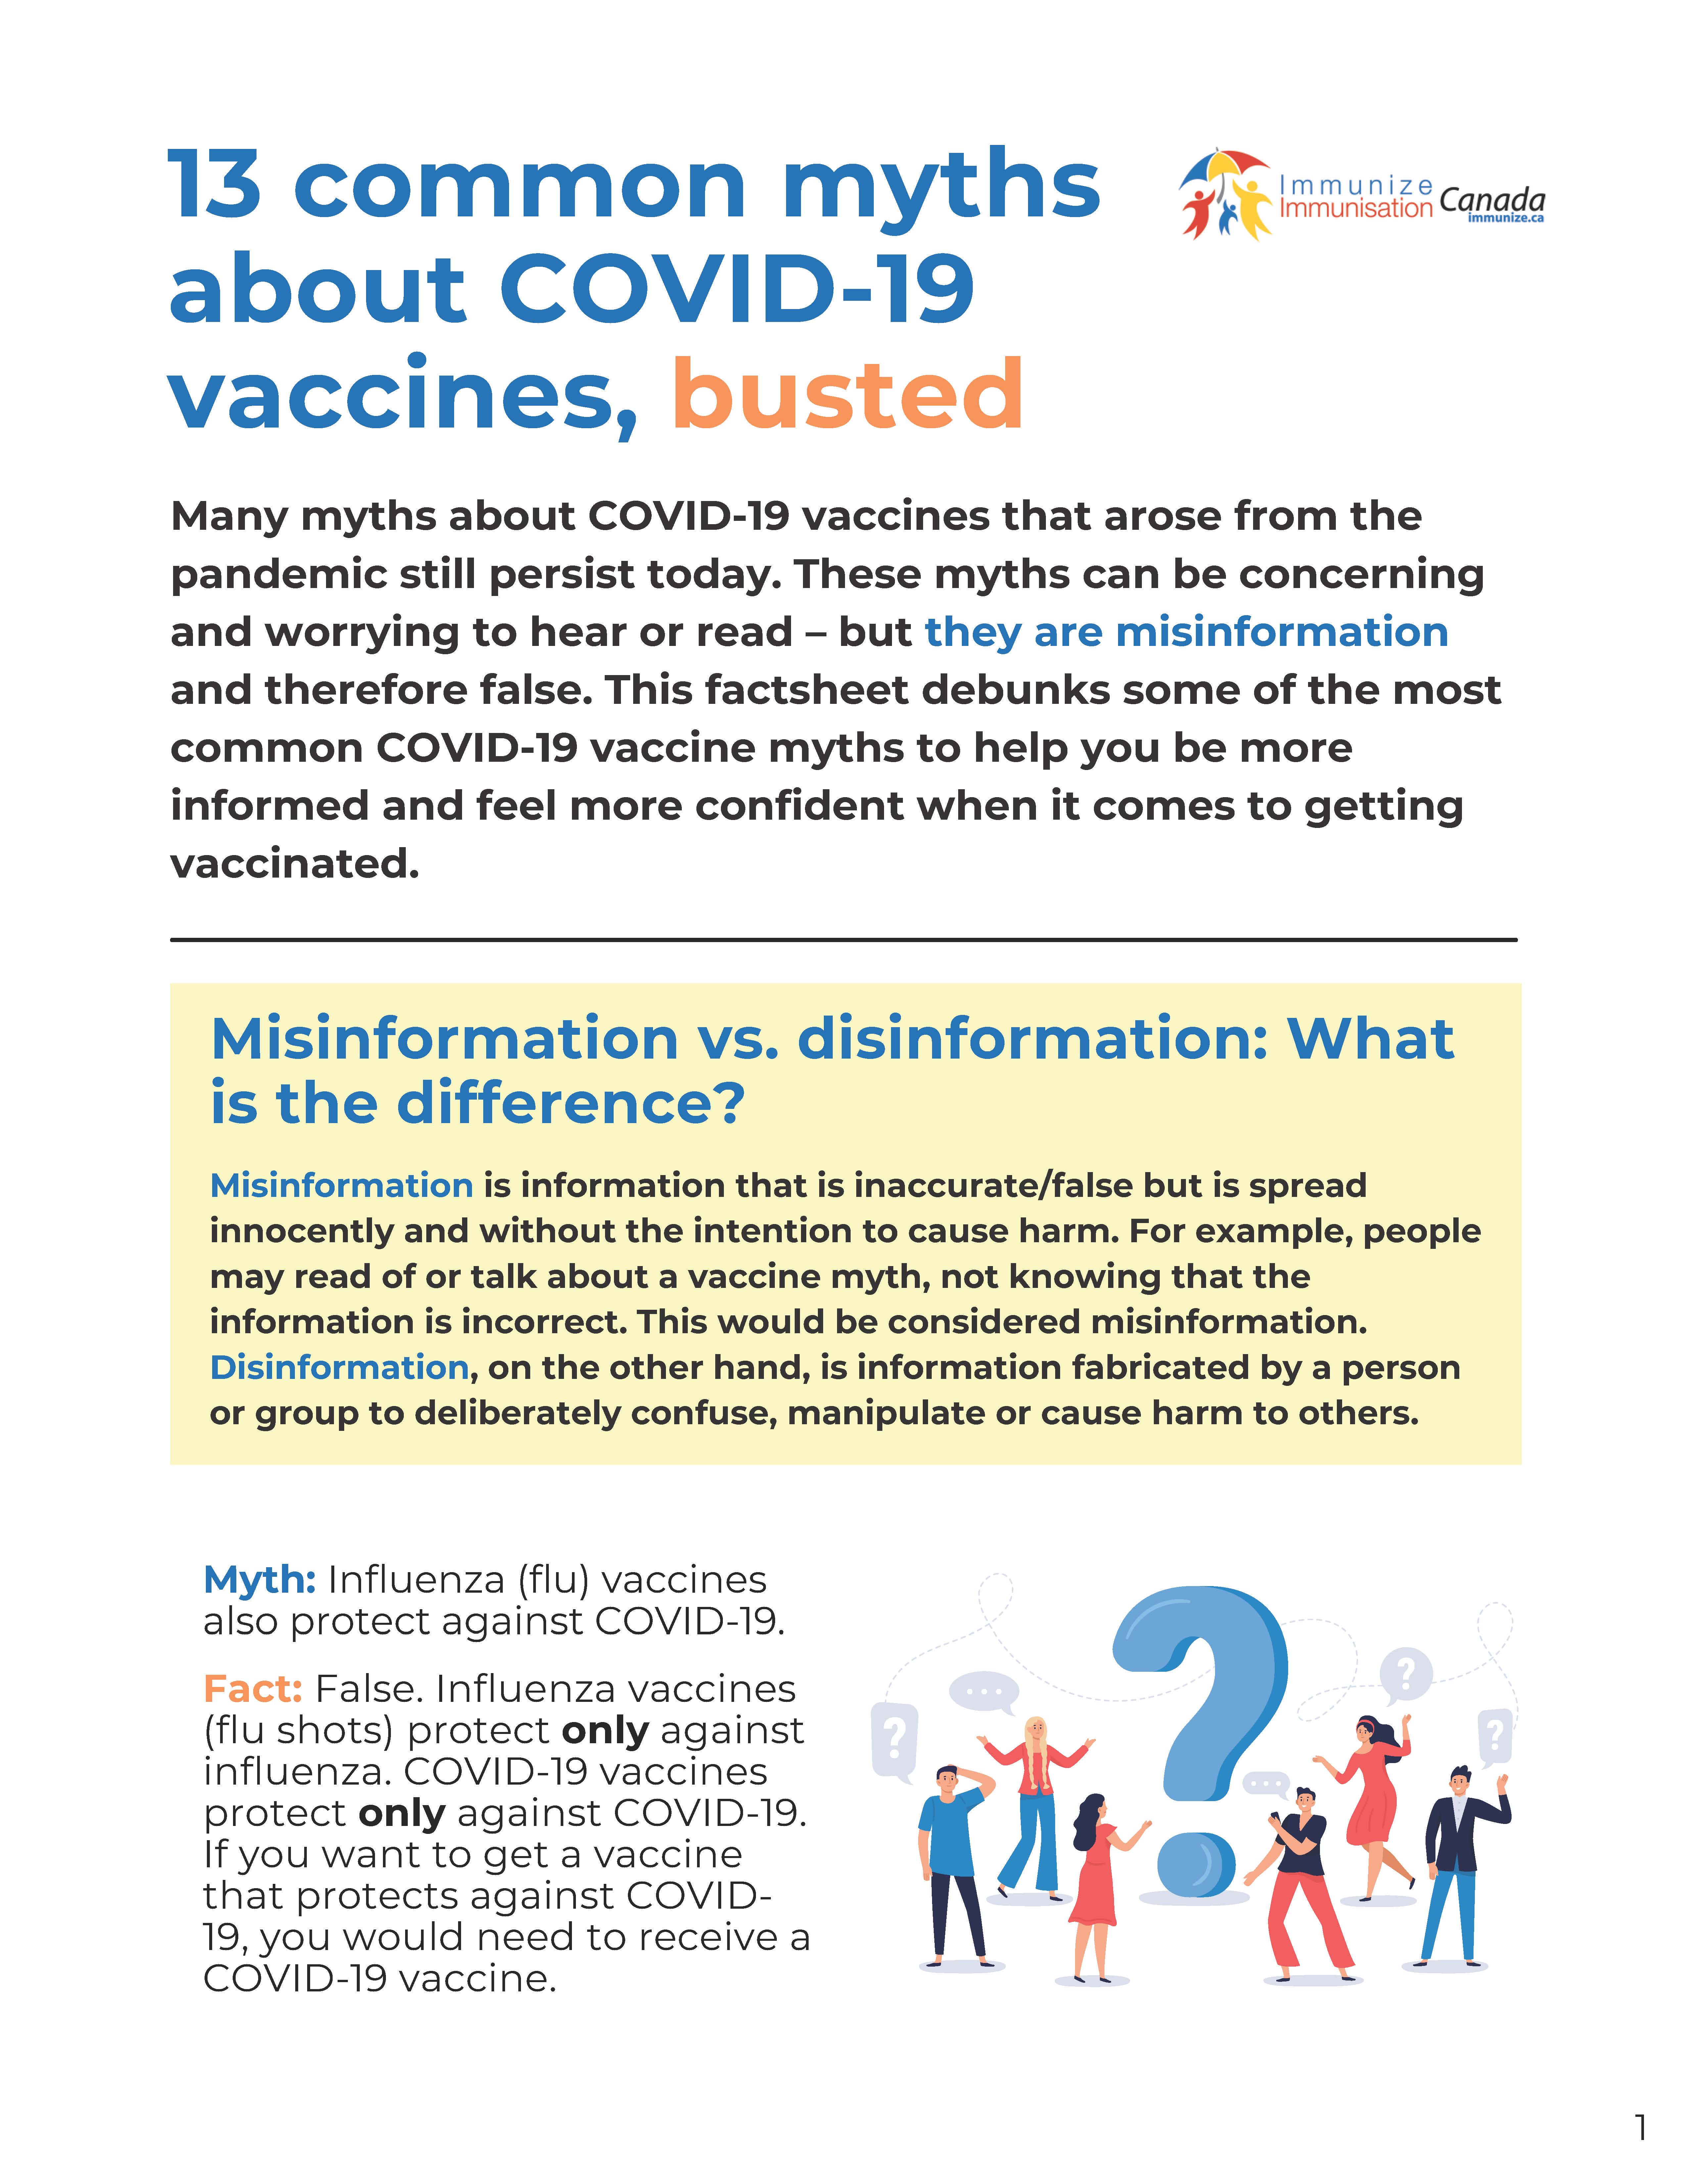 13 common myths about COVID-19 vaccines, busted - factsheet